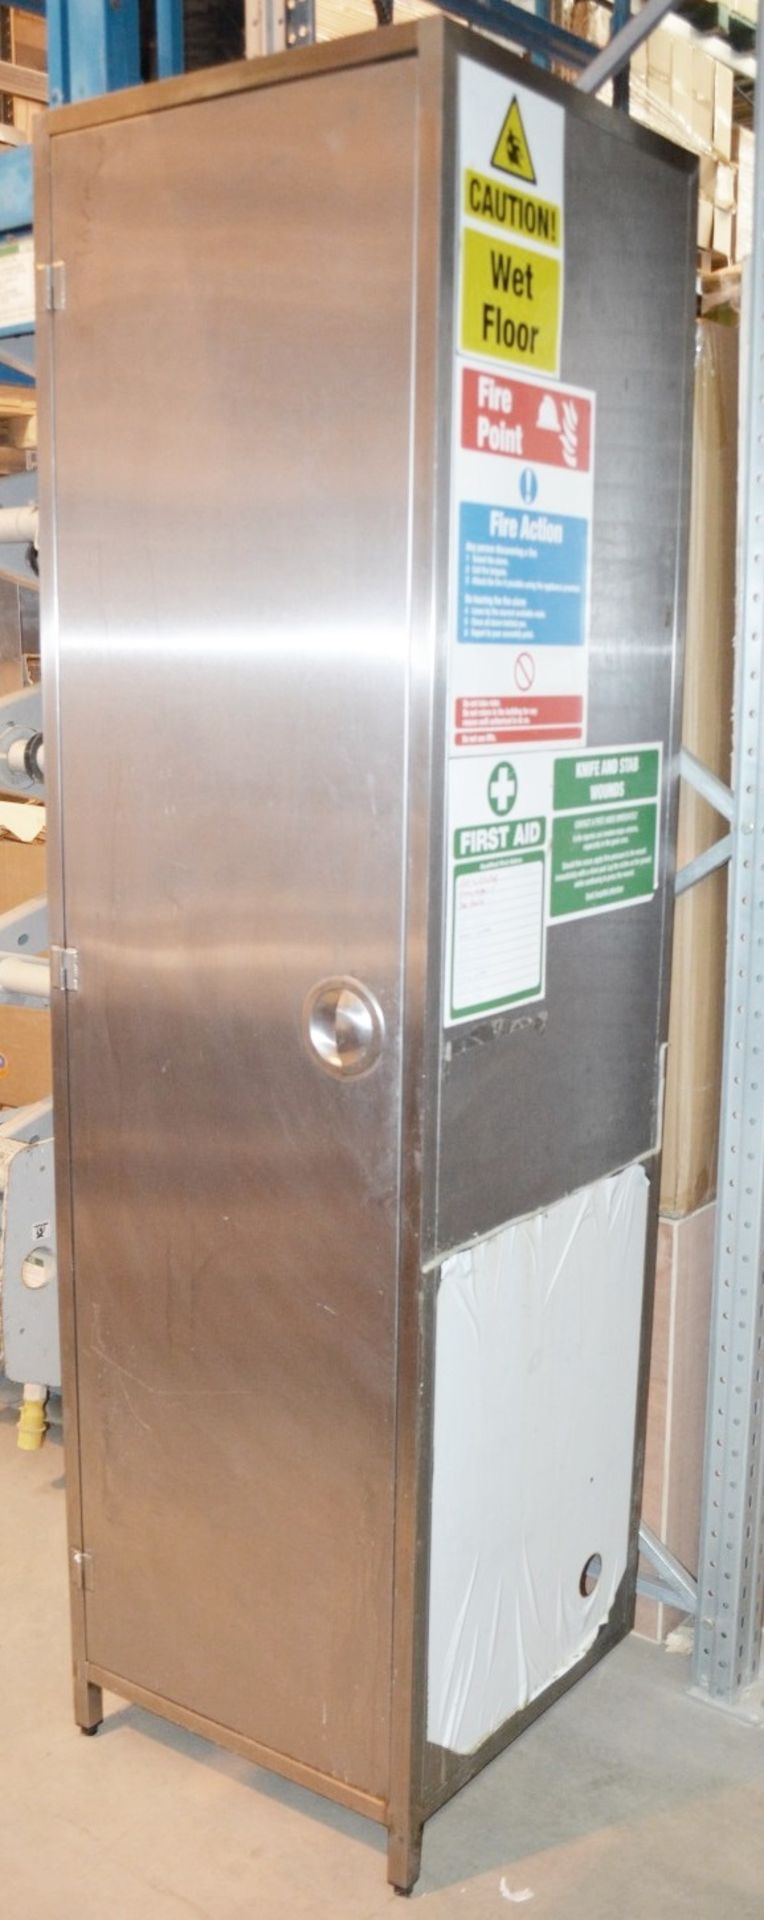 1 x Stainless Steel Commercial Kitchen  Wall-mounted Utility Cupboard - Dimensions: H220xW60xD60cm - Image 2 of 5